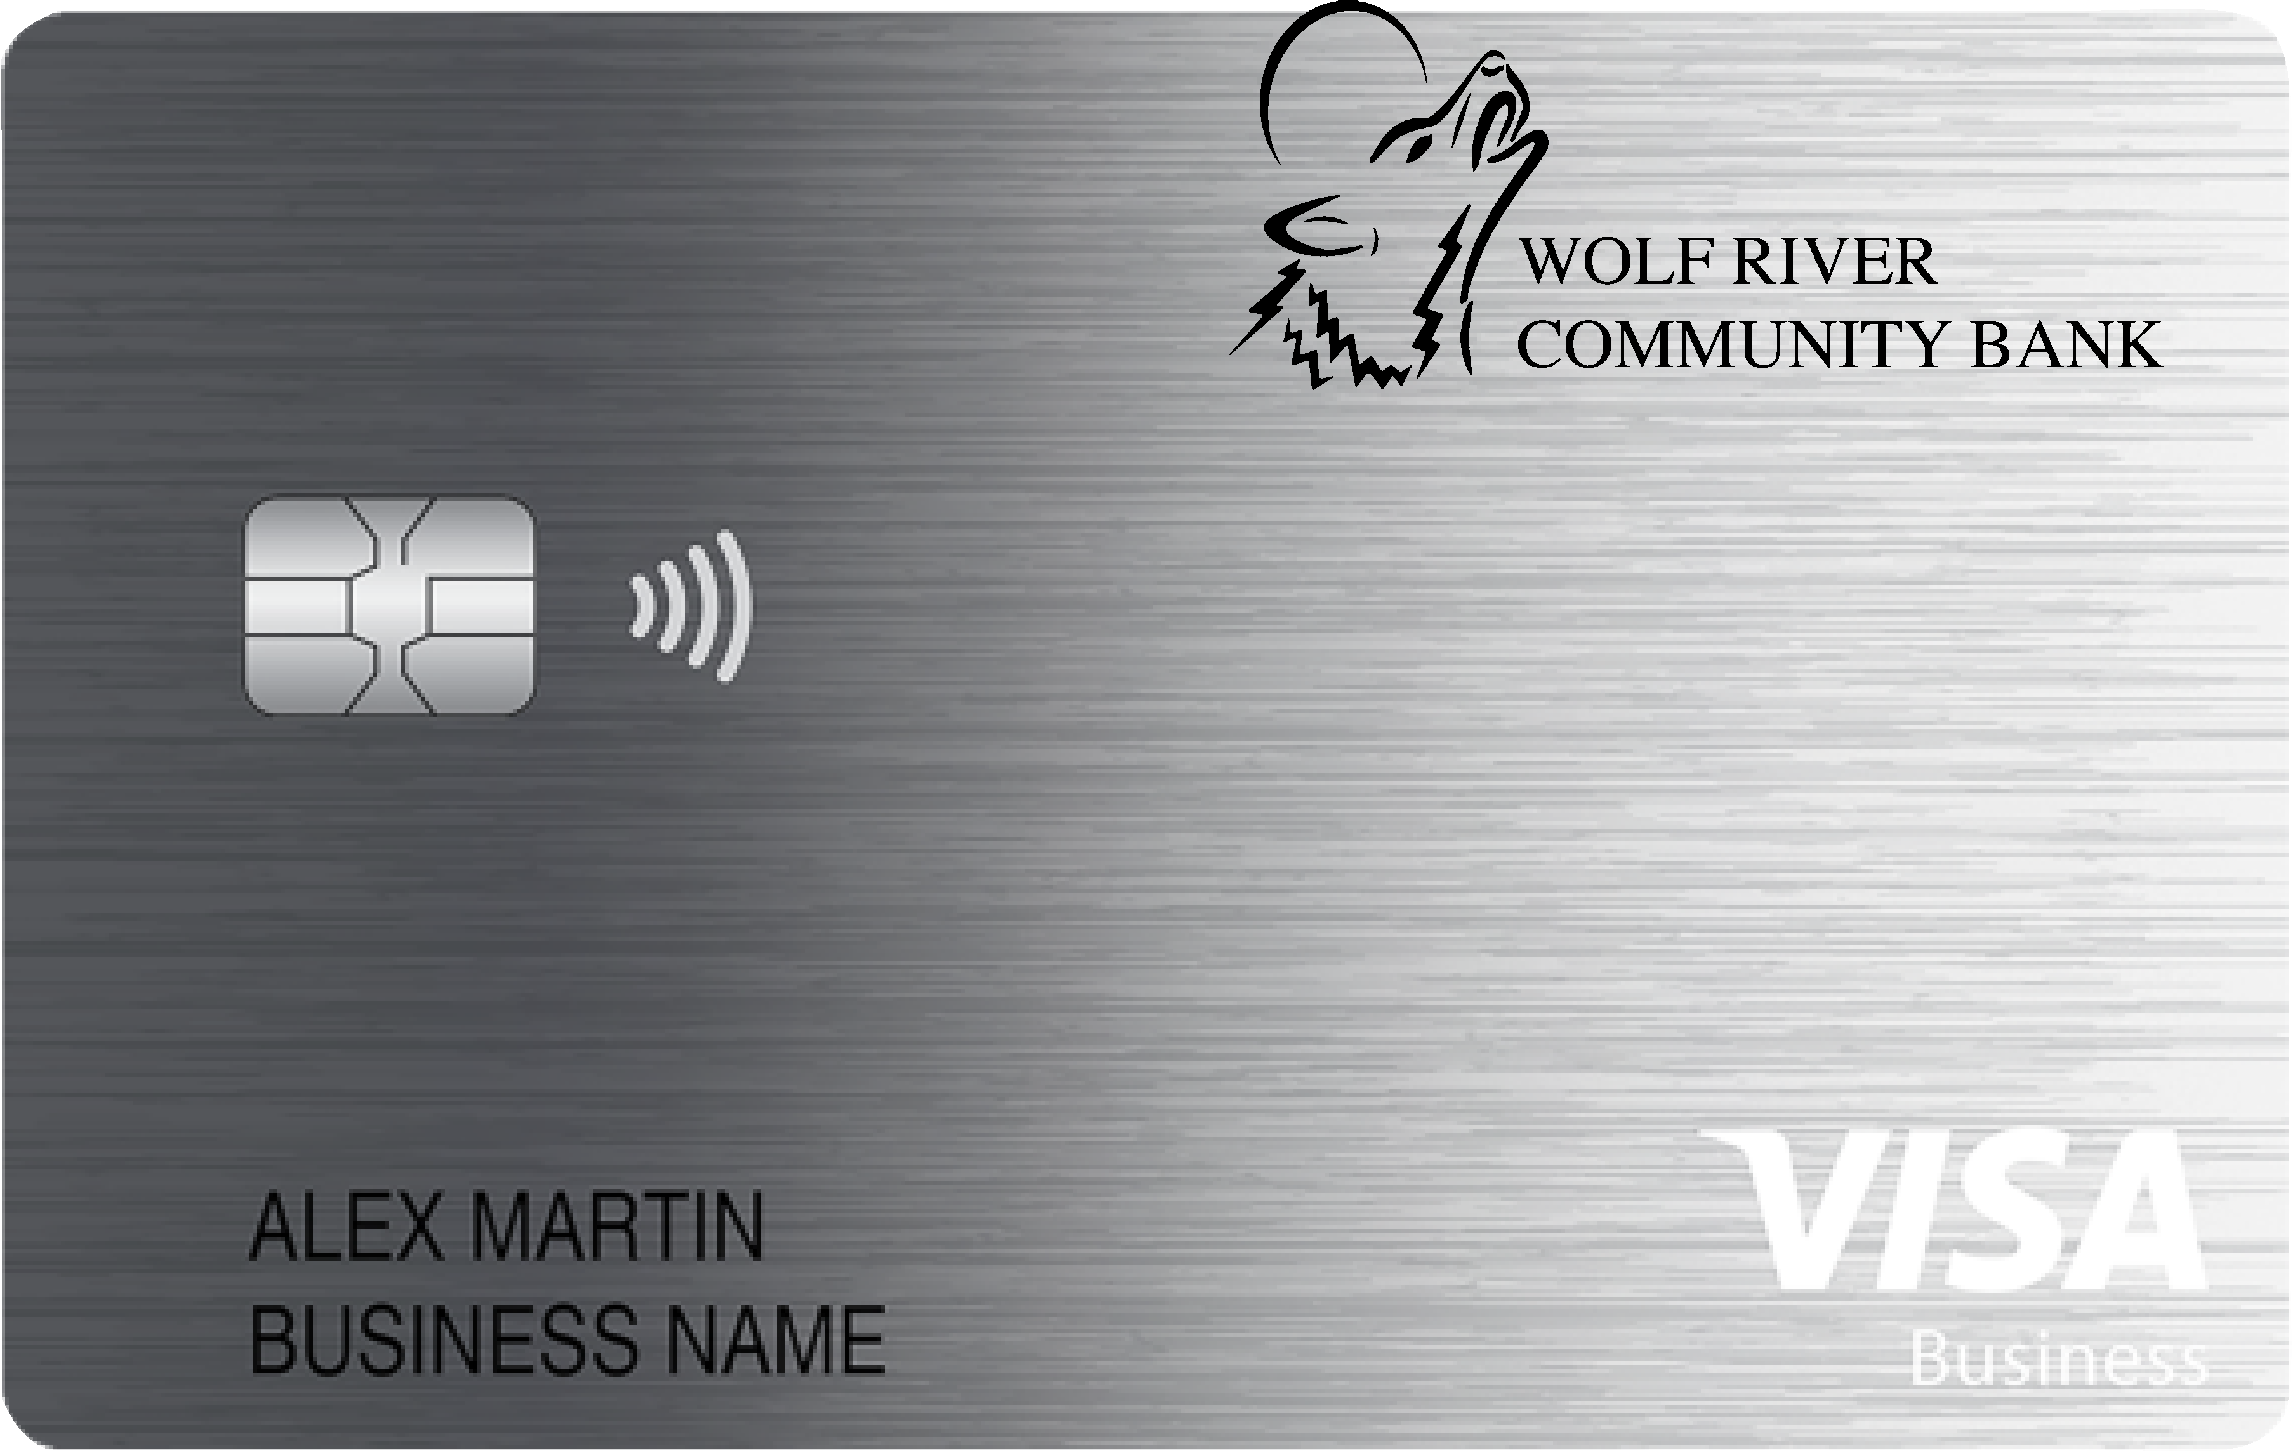 Wolf River Community Bank Business Card Card